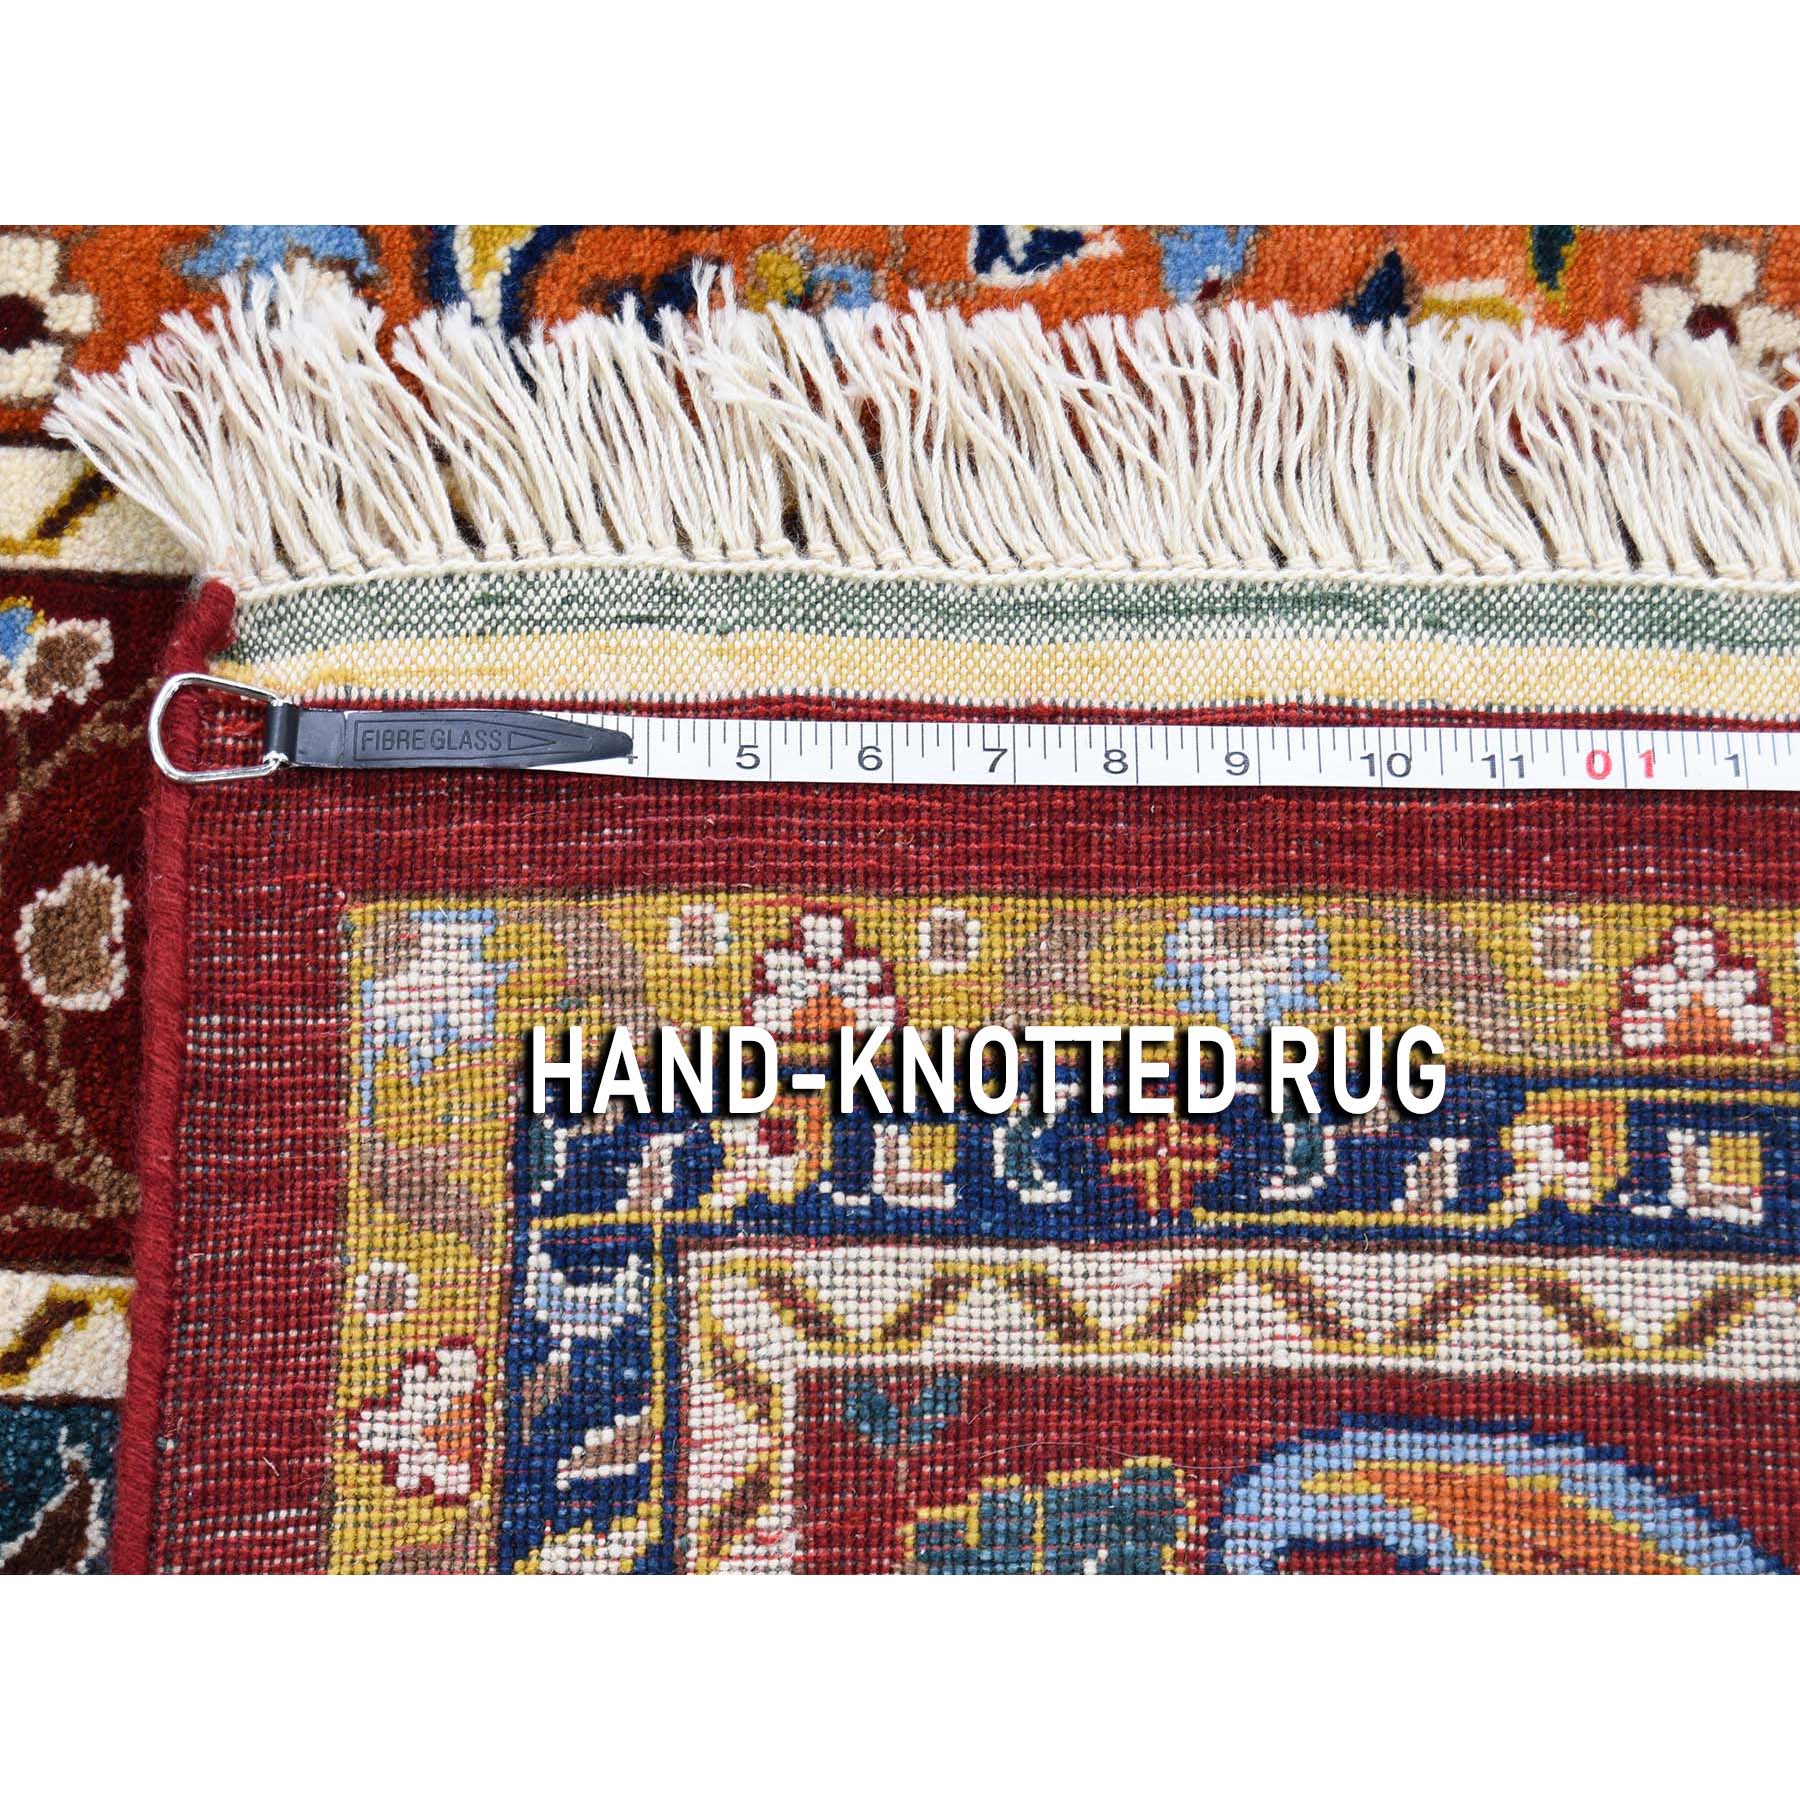 8-2 x9-10  On Clearance Kashkuli Shawl Design With Paisley Multicolored Hand Knotted Oriental Rug 